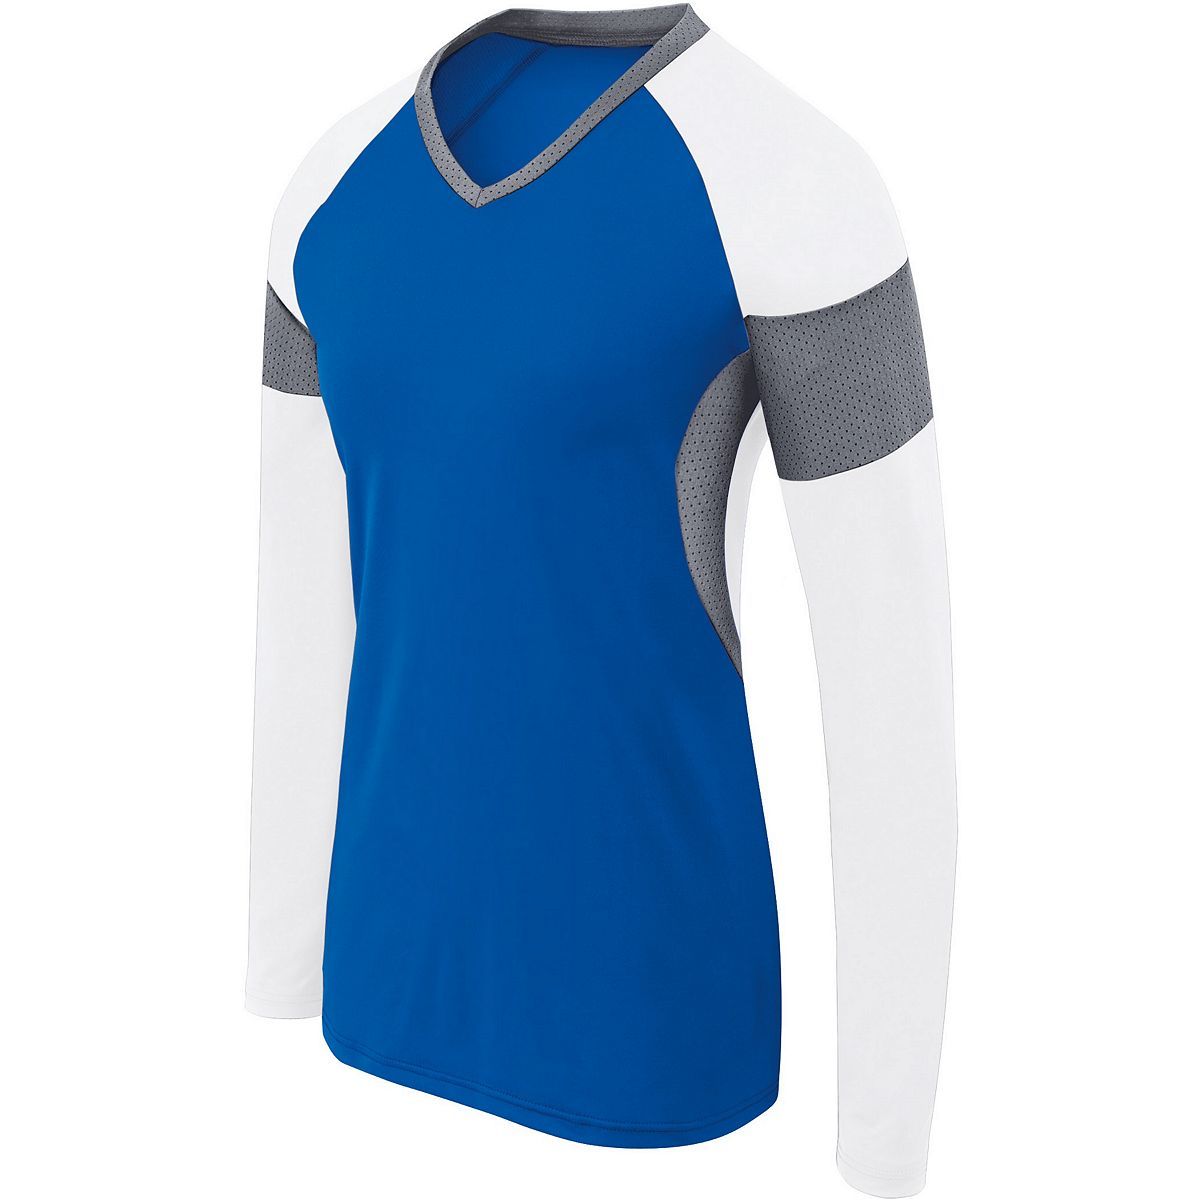 High 5 Ladies Long Sleeve Raptor Jersey in Royal/White/Graphite  -Part of the Ladies, Ladies-Jersey, High5-Products, Volleyball, Shirts product lines at KanaleyCreations.com